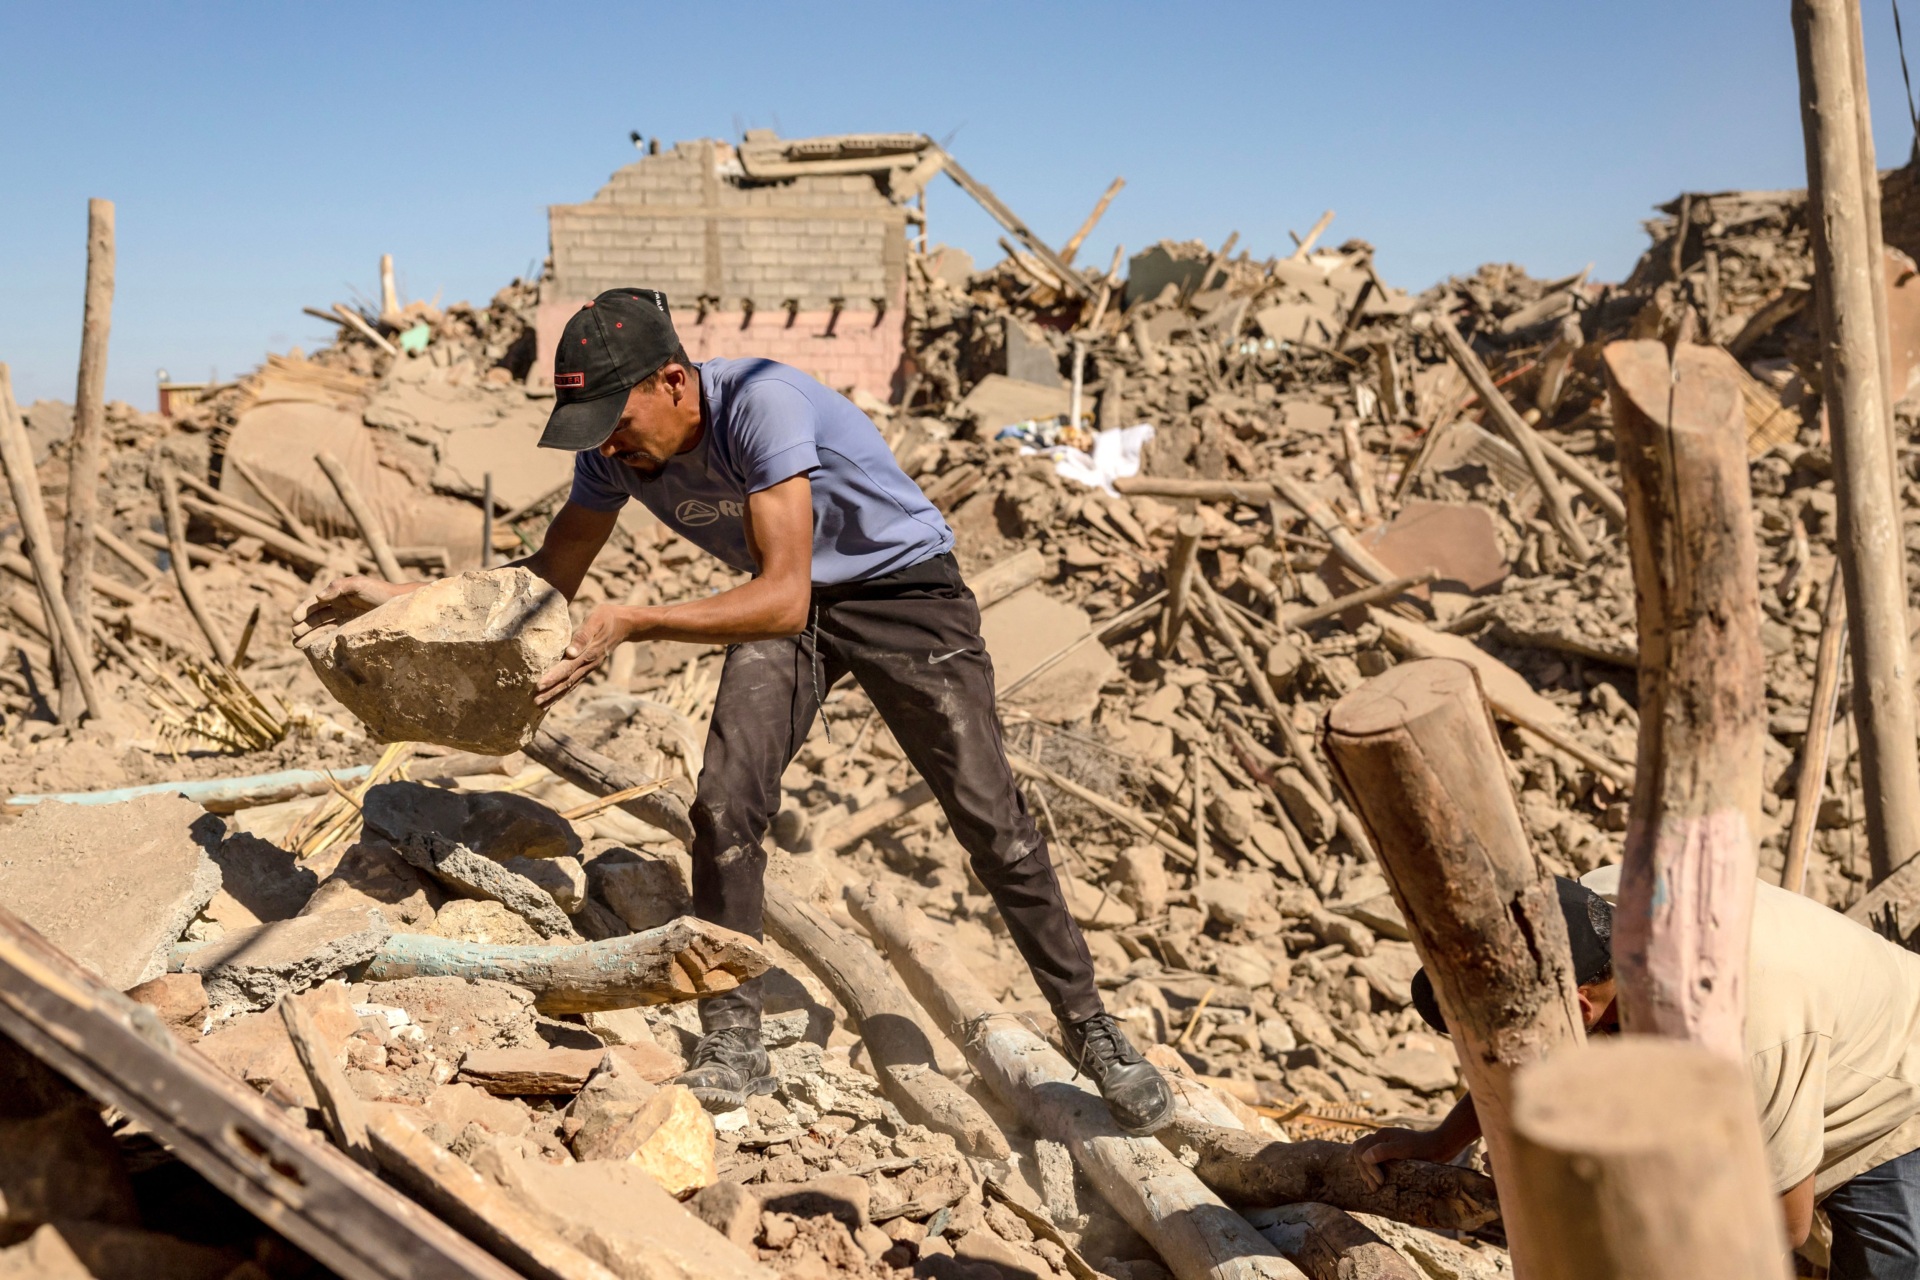 Volunteers search the rubble of collapsed houses in Tafeghaghte, 60 kilometres (37 miles) southwest of Marrakesh, on September 10, 2023, two days after a devastating 6.8-magnitude earthquake struck the country. Moroccans on September 10 mourned the victims of a devastating earthquake that killed more than 2,000 people as rescue teams raced to find survivors trapped under the rubble of flattened villages. (Photo by FADEL SENNA / AFP) (Photo by FADEL SENNA/AFP via Getty Images)